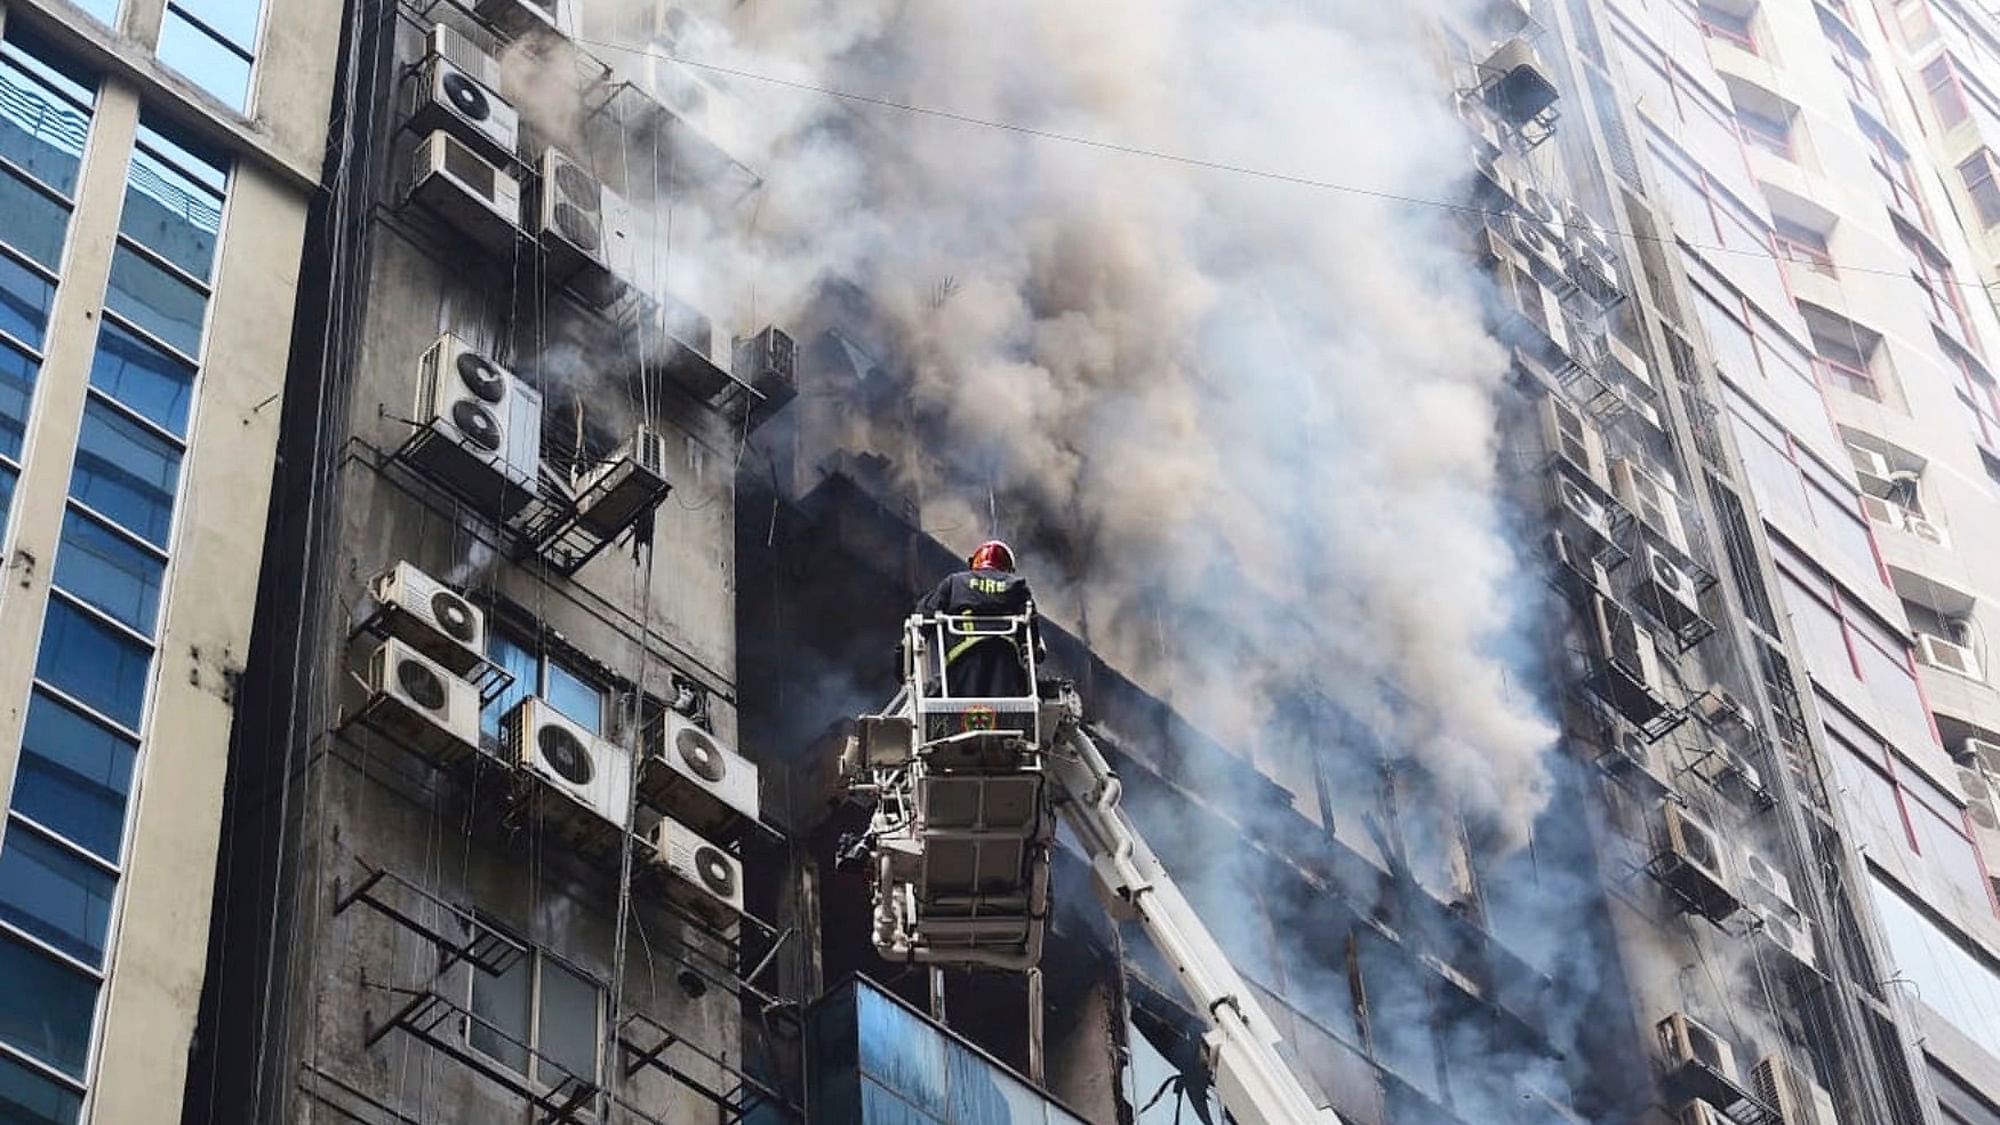 A firefighter works to douse a fire in a multi-storied office building in Dhaka, Bangladesh. 